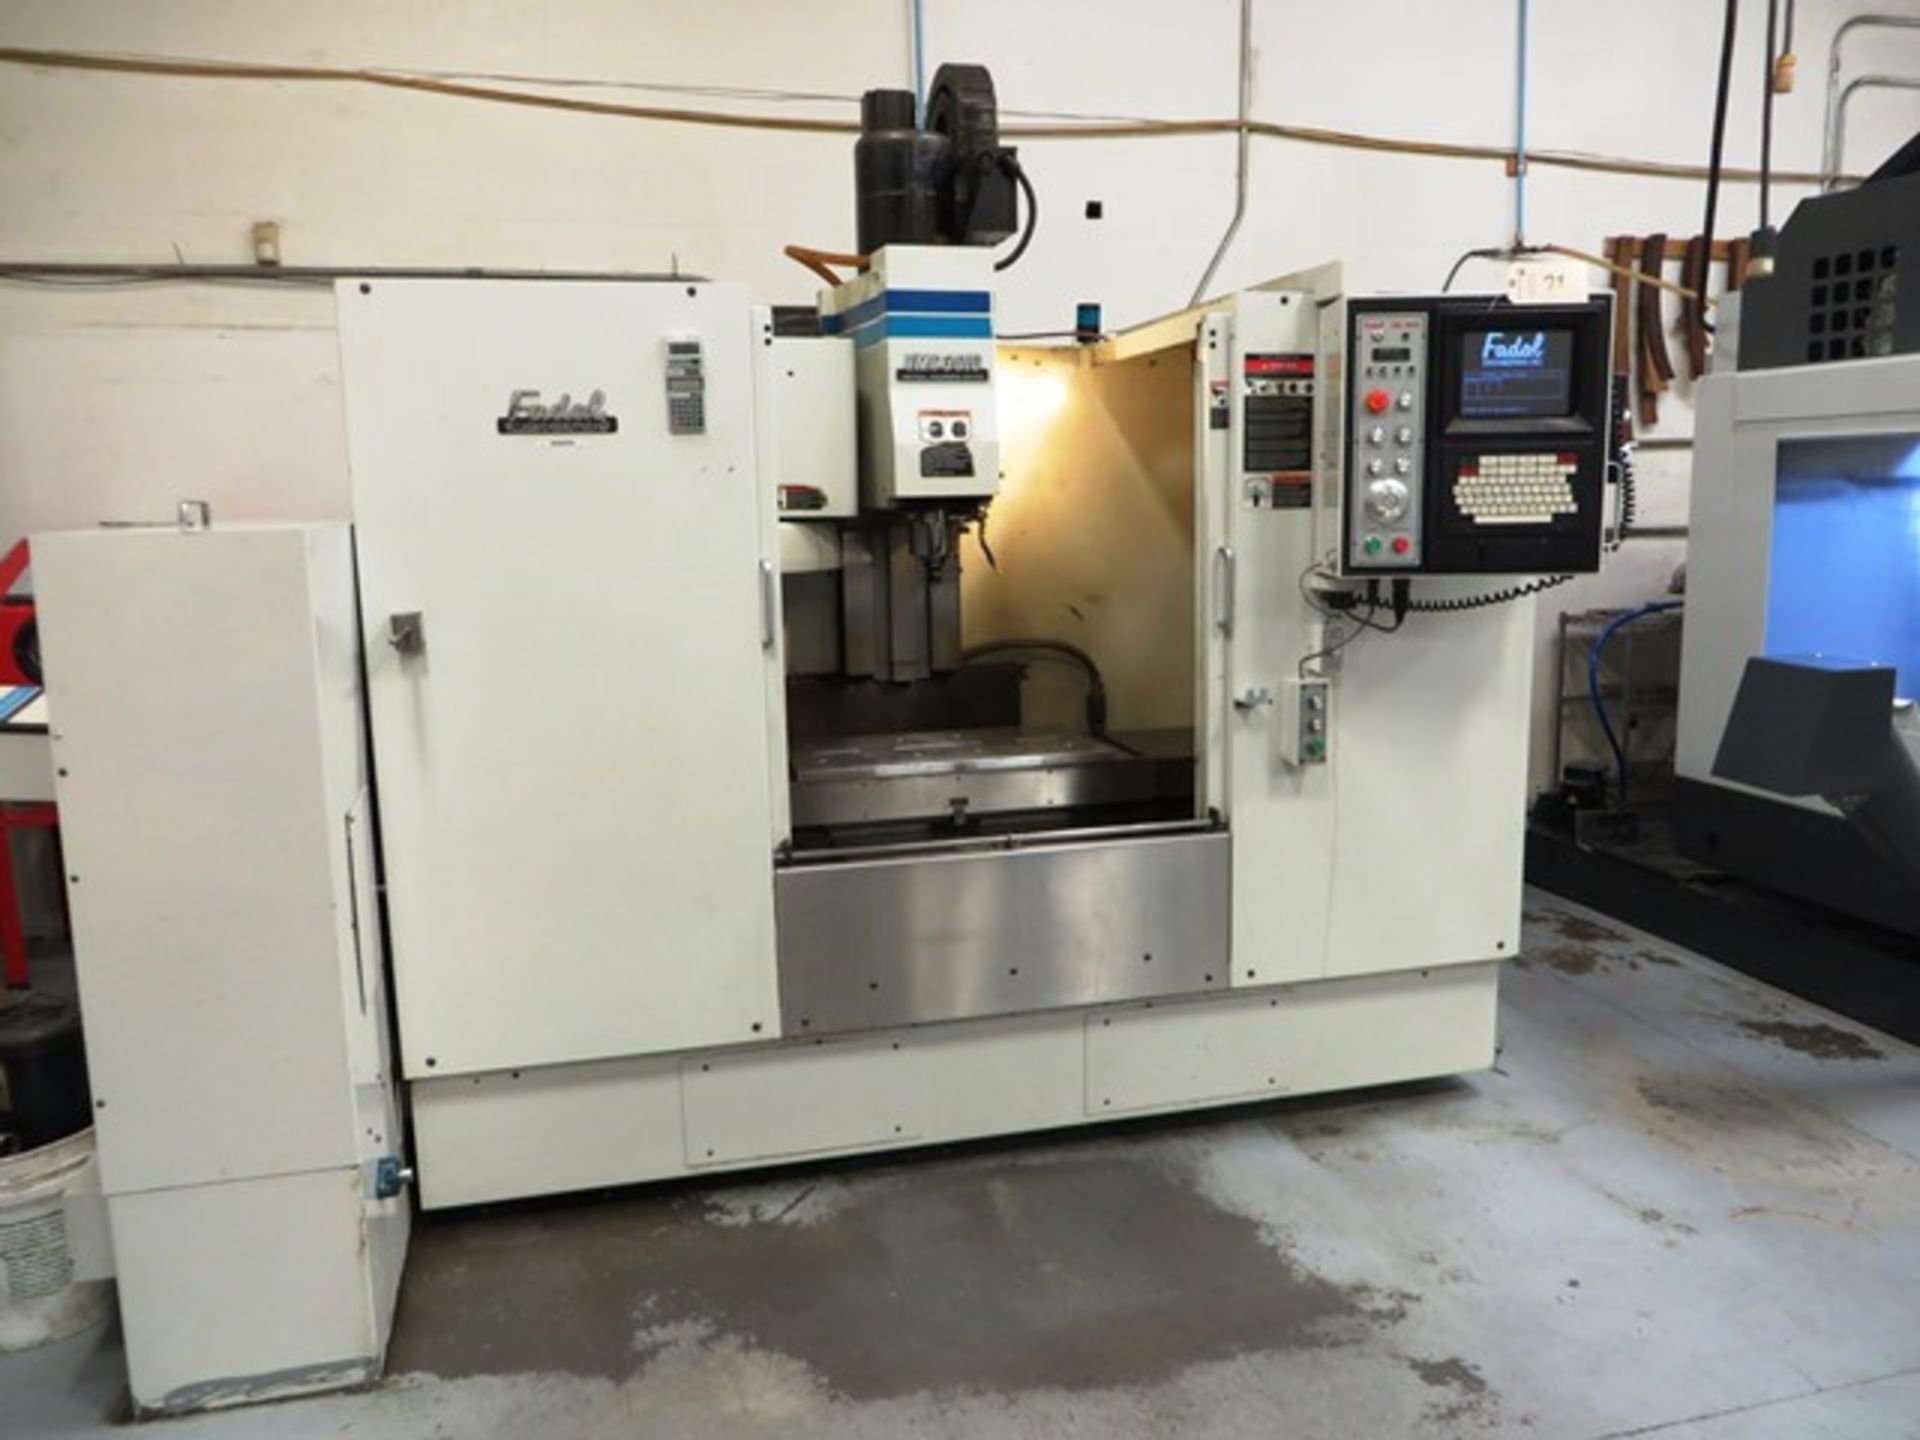 Fadal 3016 CNC Vertical Machining Center - Image 4 of 5